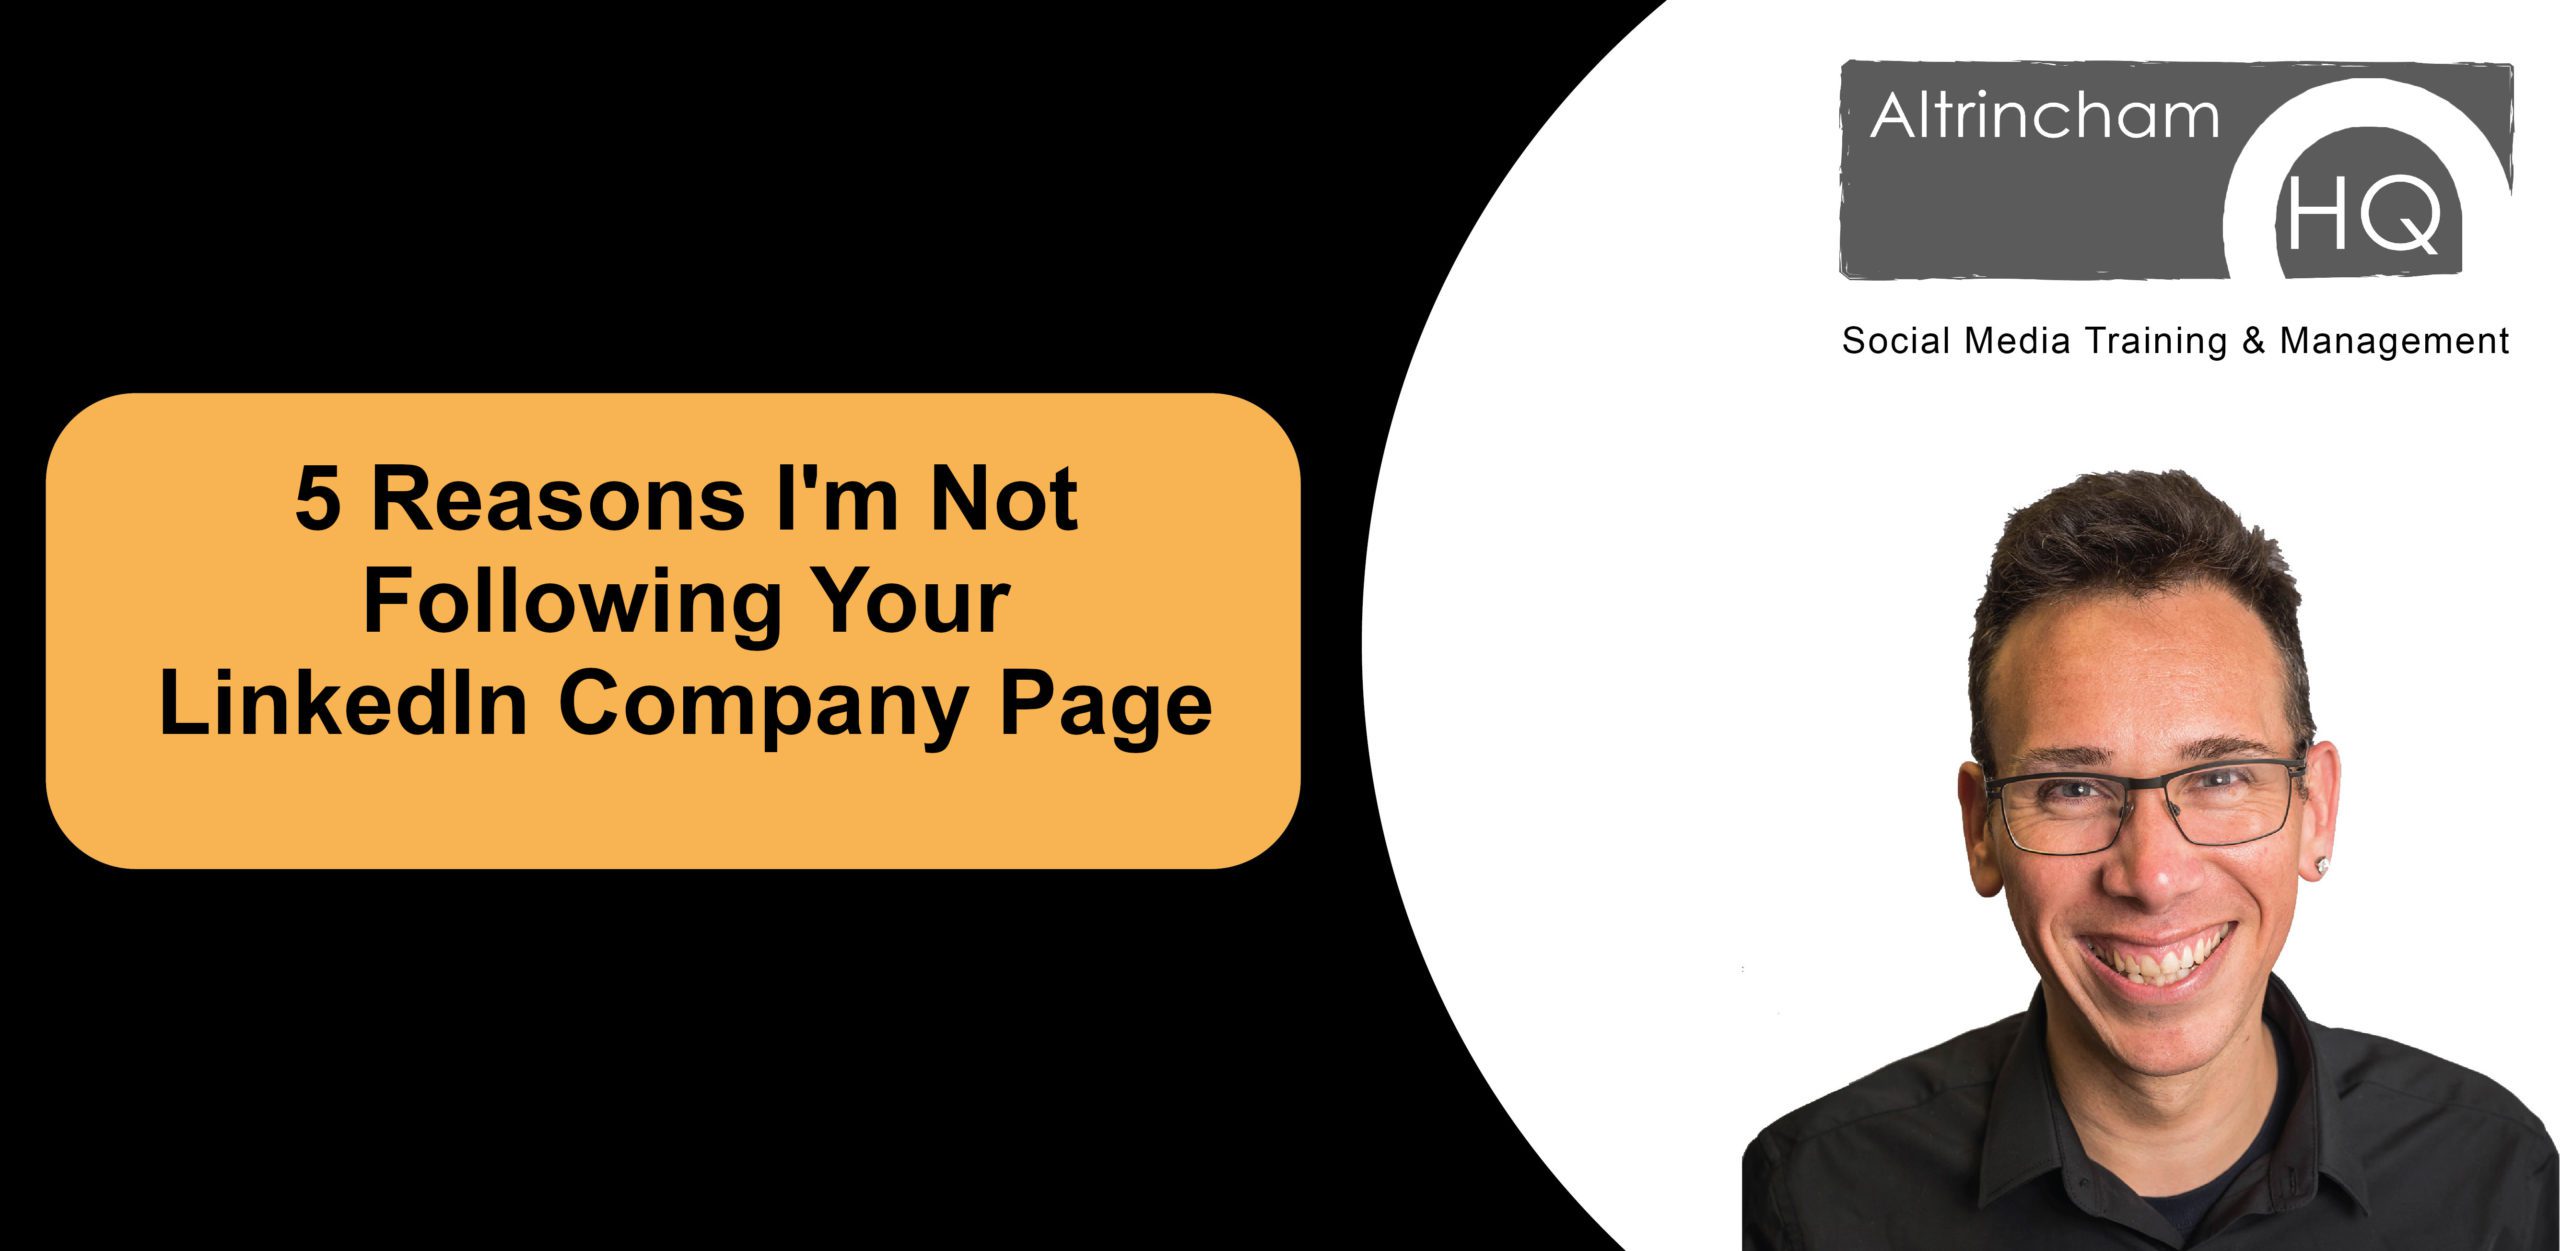 5 Reasons I’m Not Following Your LinkedIn Company Page